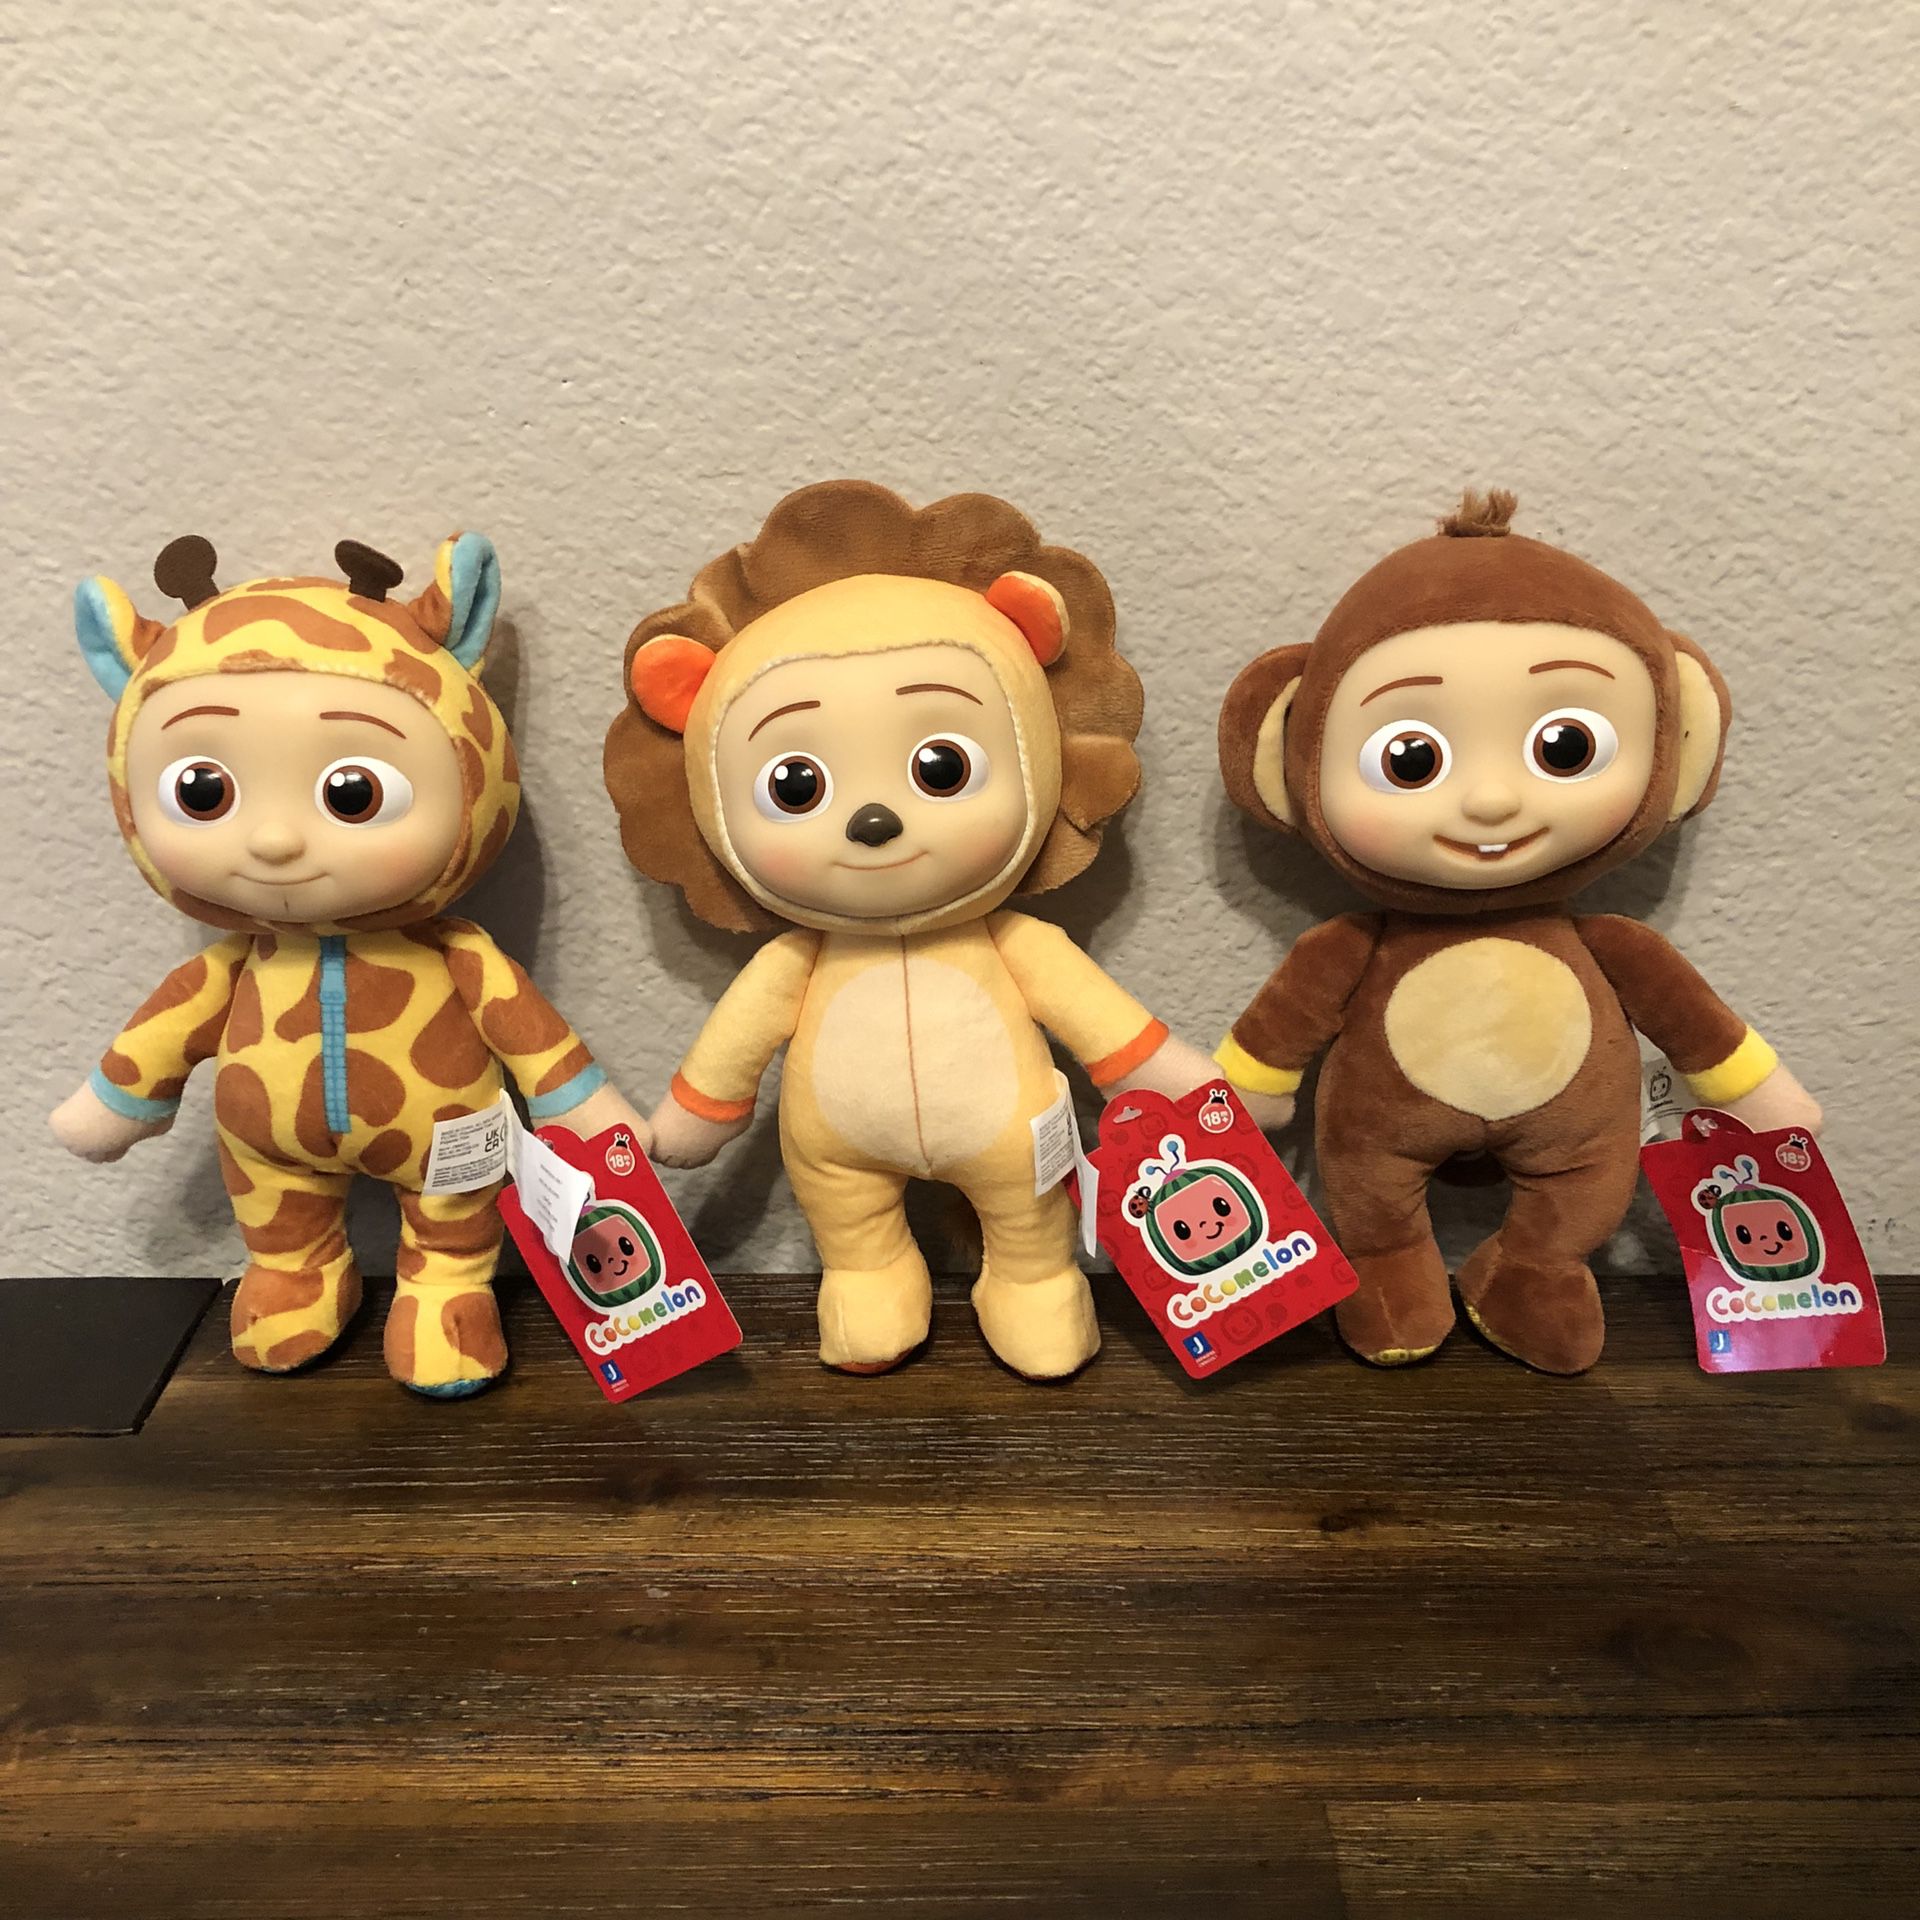 NEW, Cocomelon JJ Monkey 8" Plush Doll Soft Toy  Cocomelon JJ LION Cat 8" Yellow Plush Doll Soft Toy w/ Plastic Face - NEW RTS  Cocomelon Official JJ 